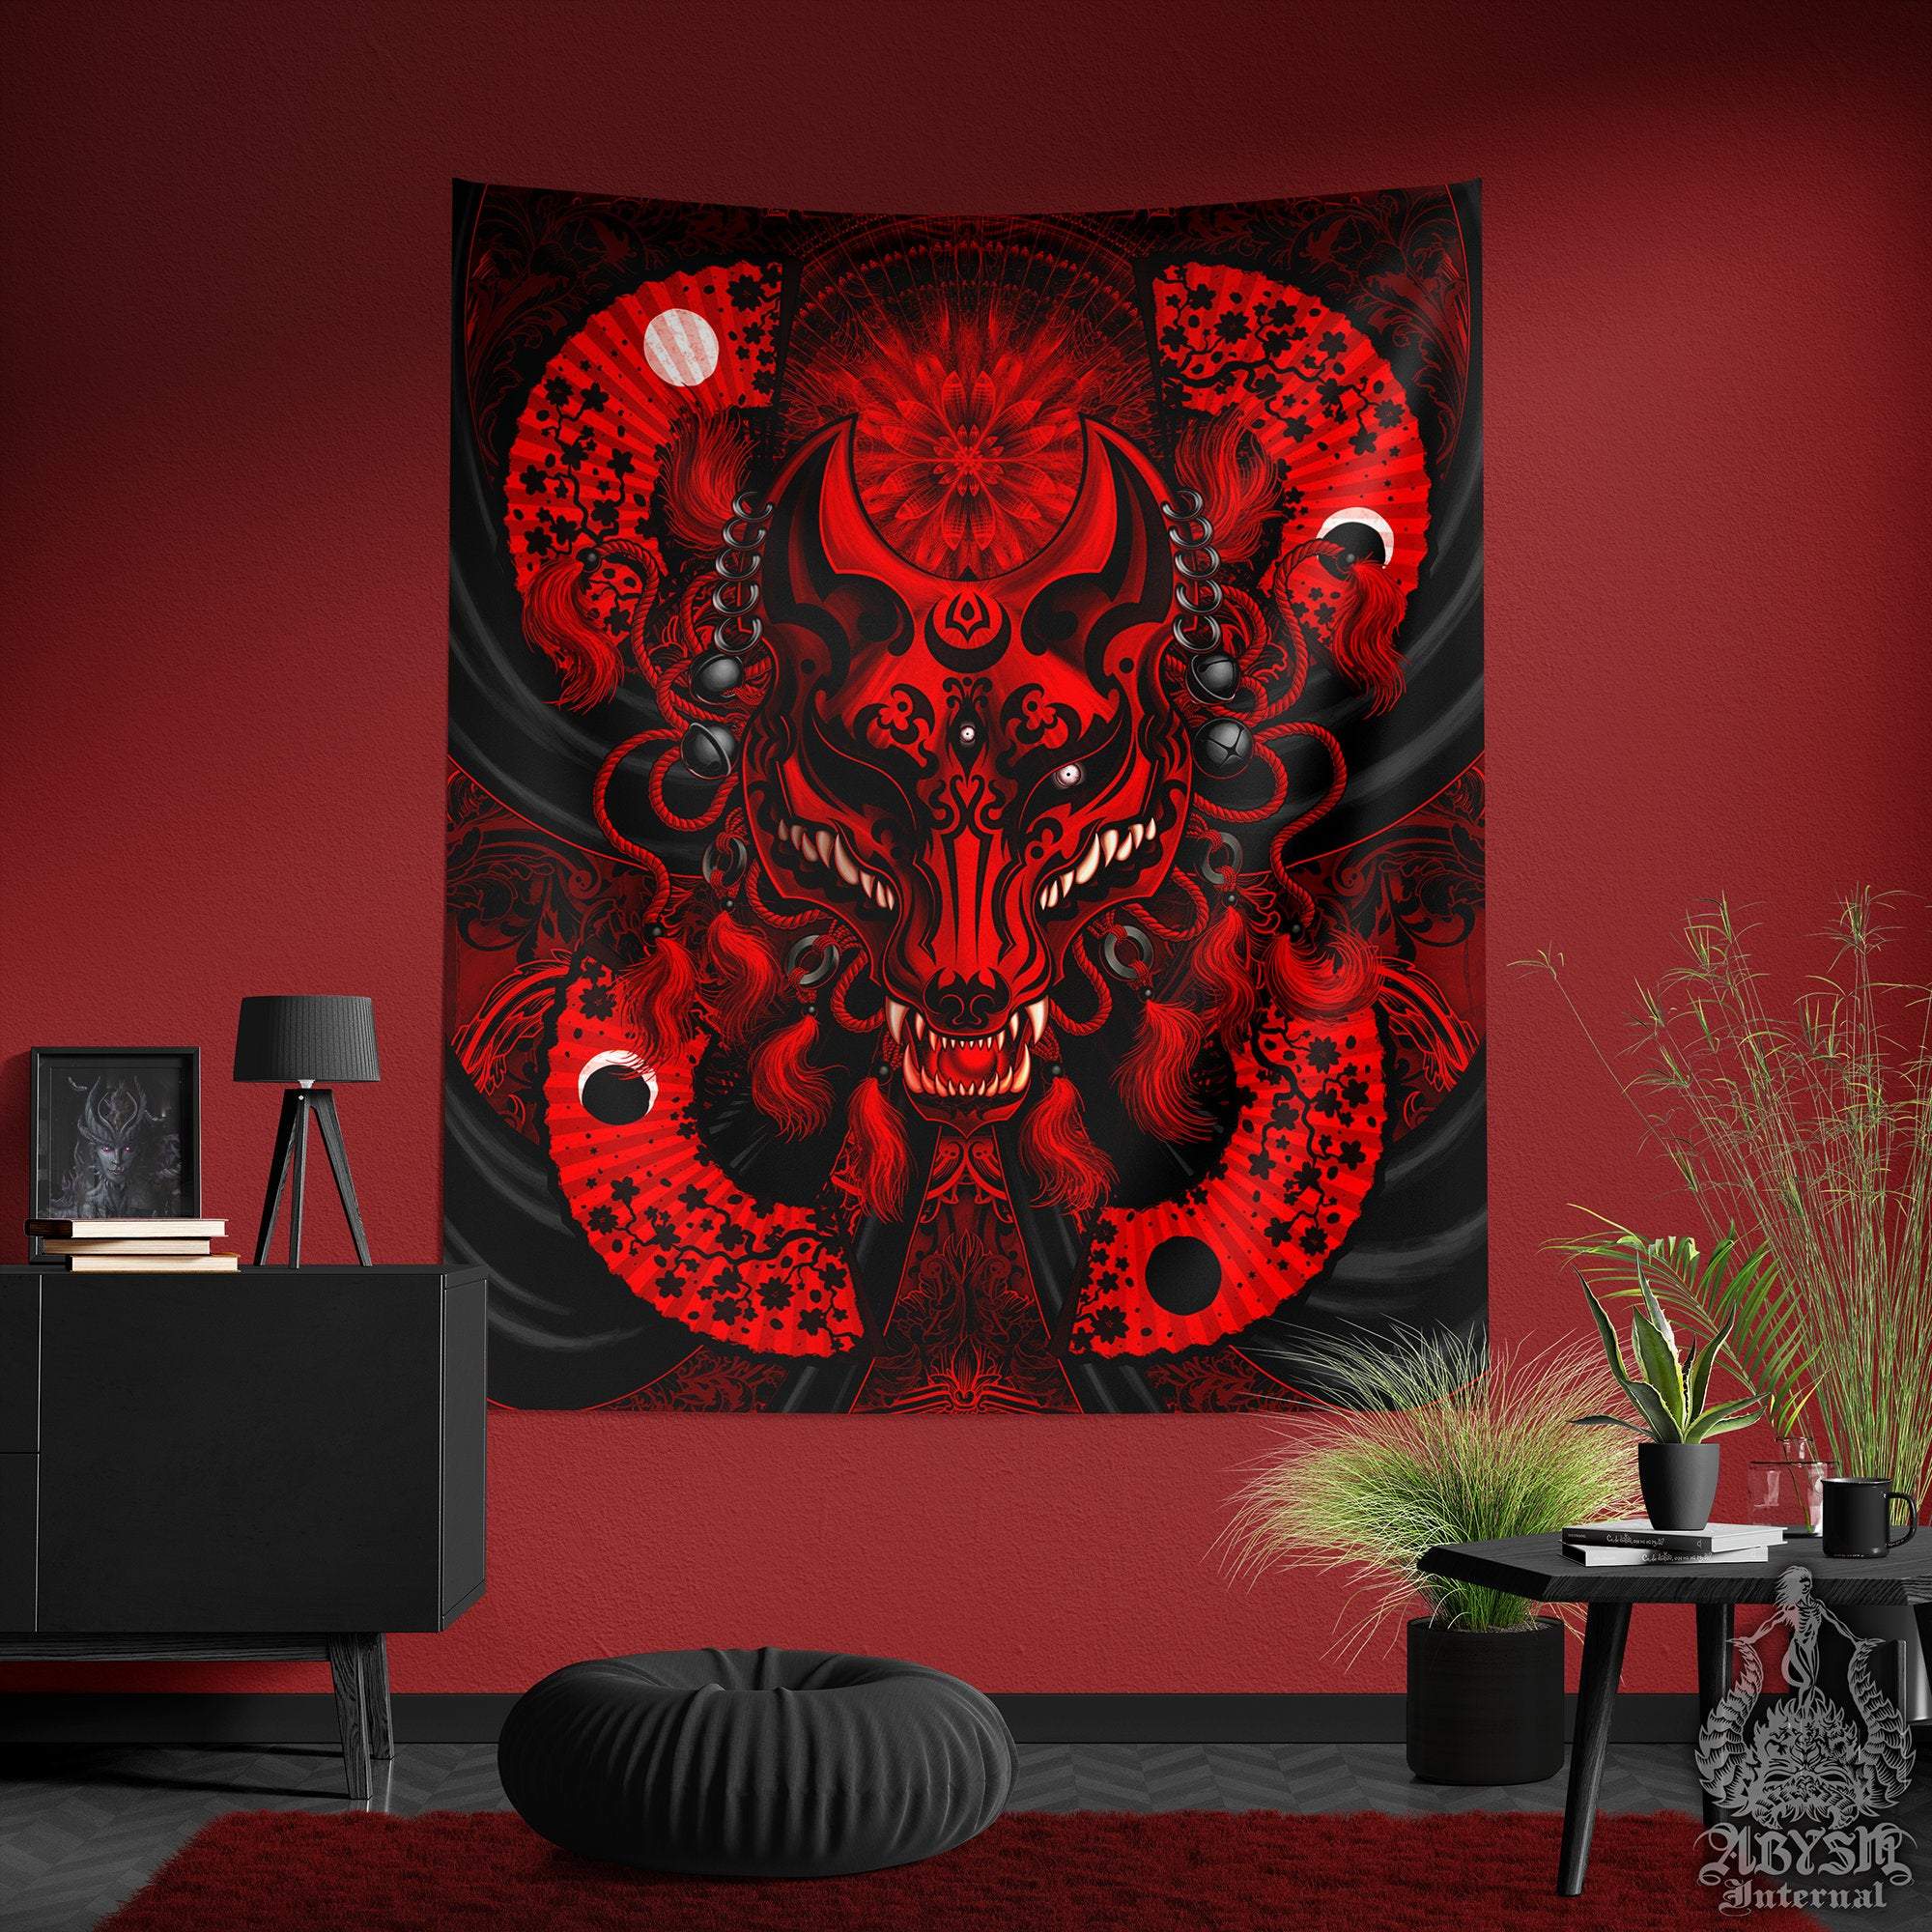 Kitsune Tapestry, Gothic Wall Hanging, Anime and Gamer Home Decor,, Okami, Fox Mask - Bloody Black - Abysm Internal